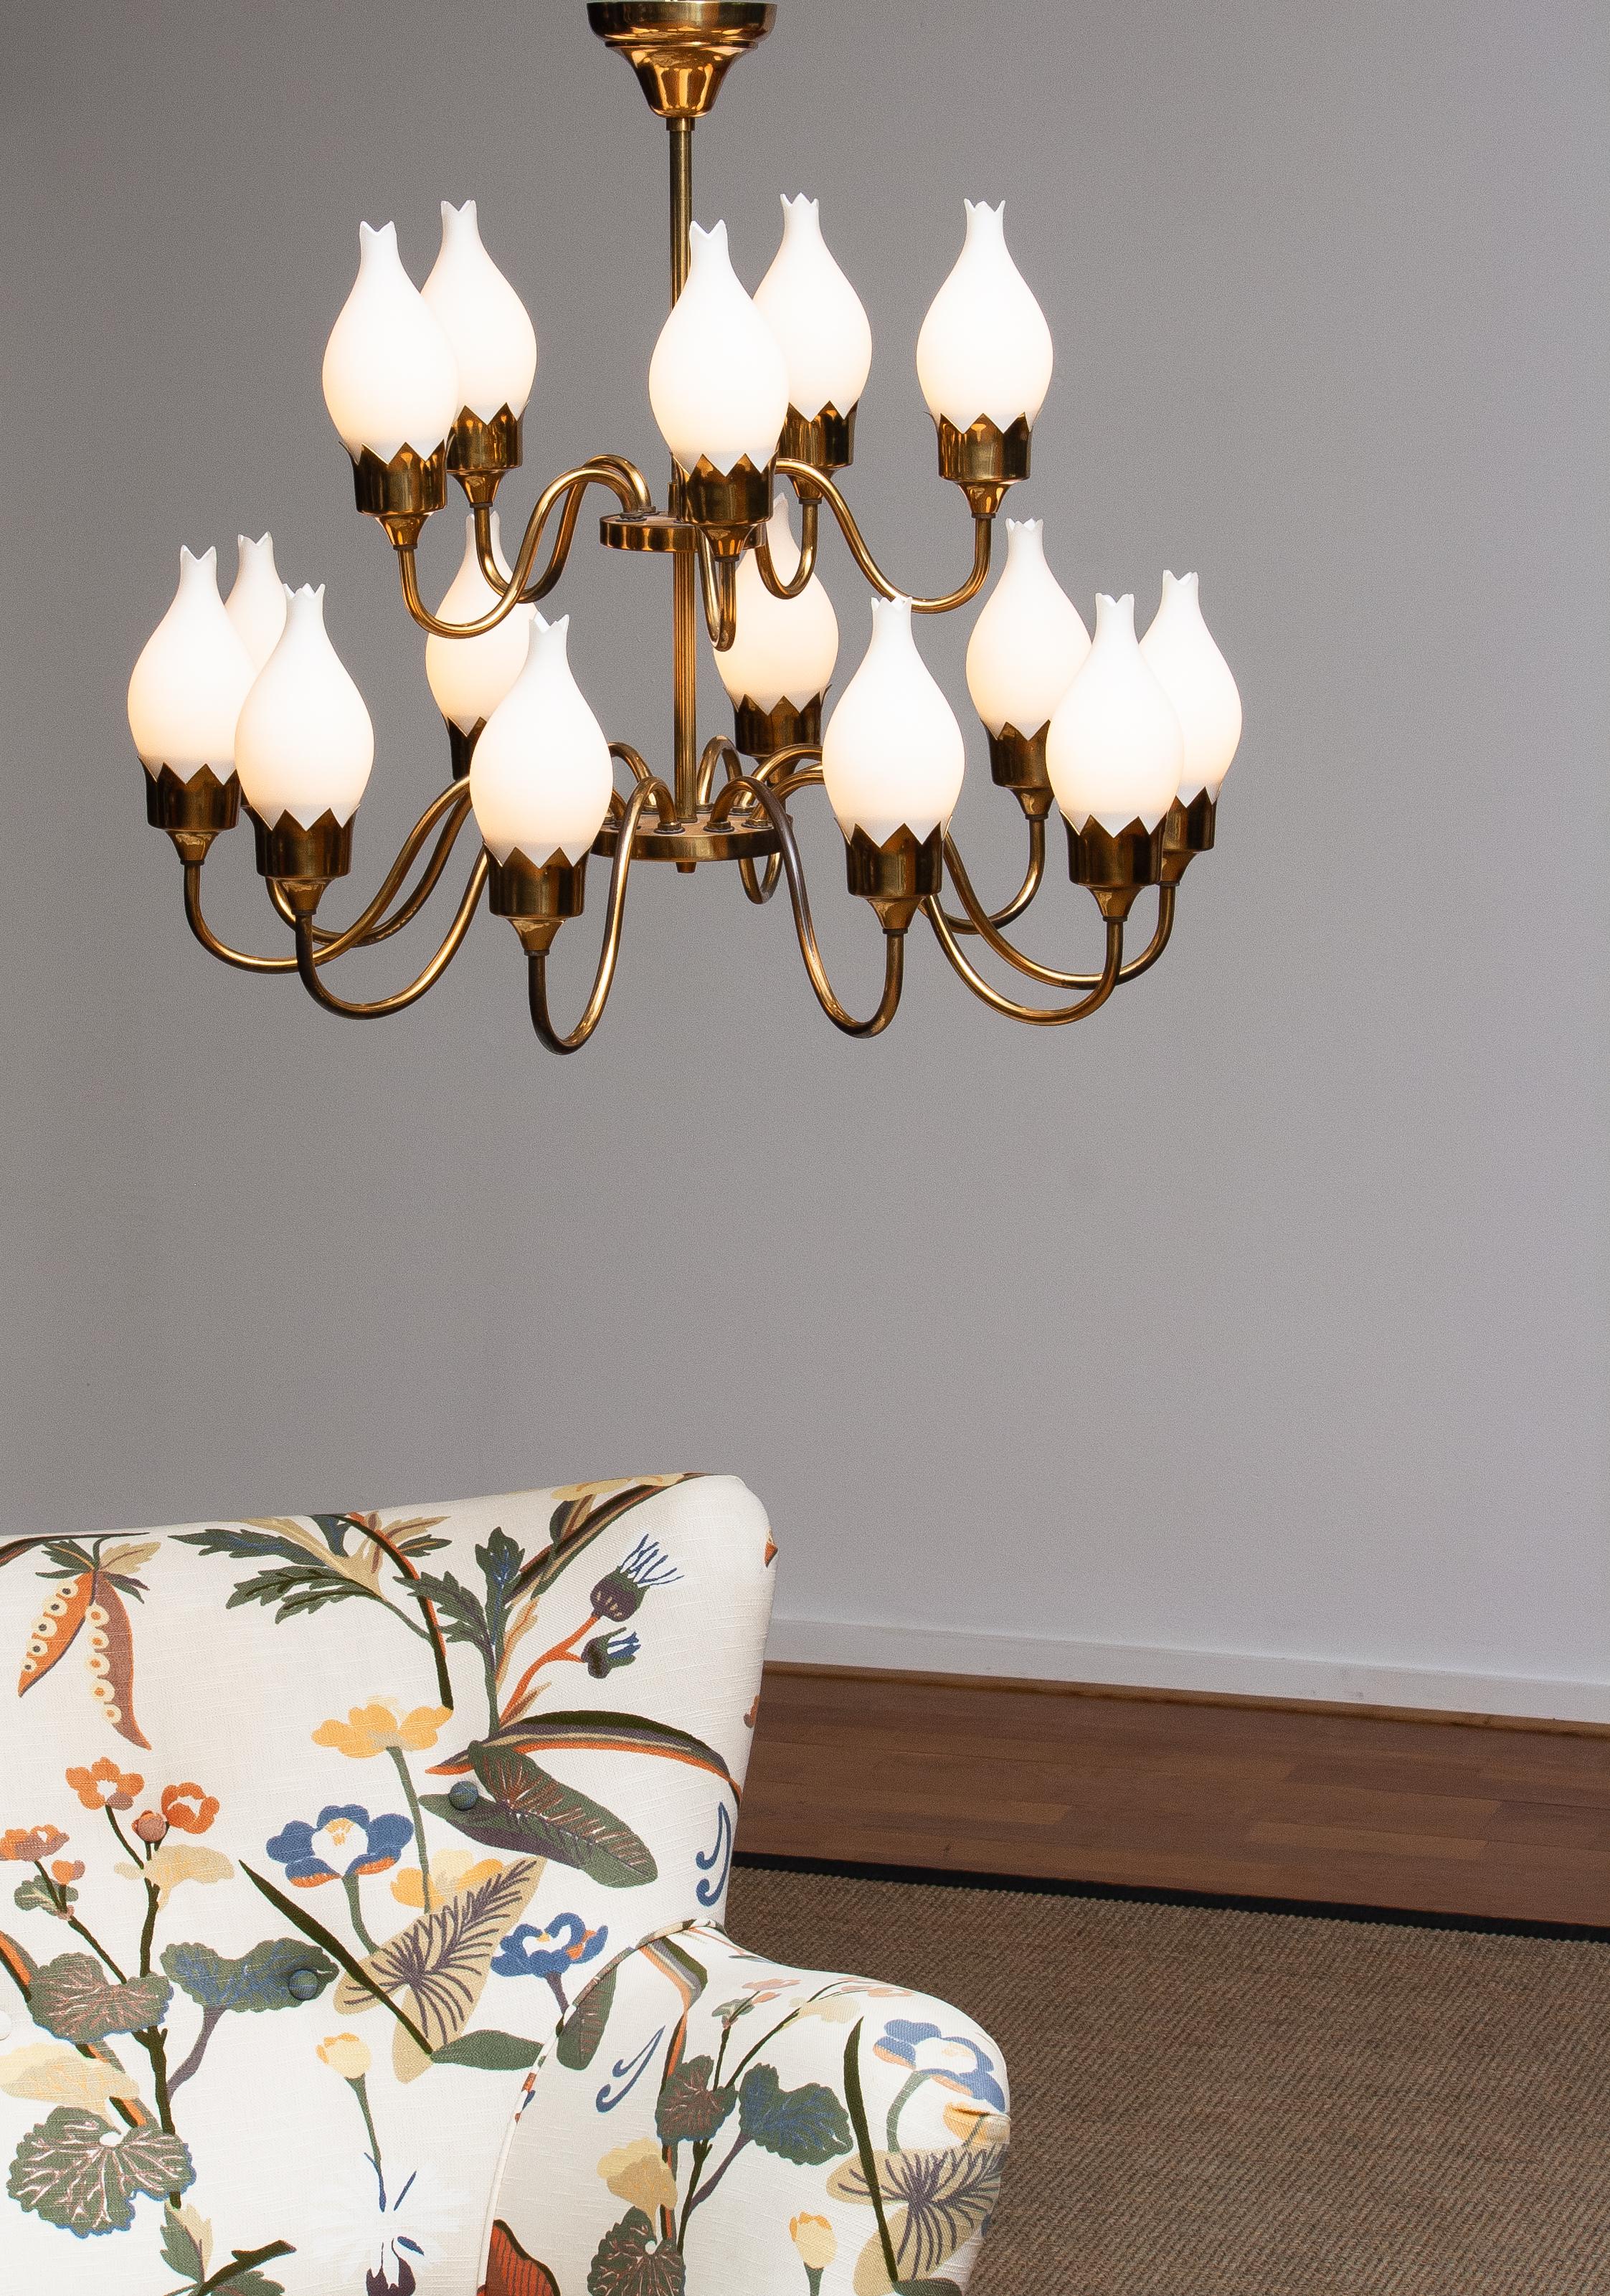 1950s, Brass and White Glass Opaline Arm Chandelier by Fog & Mørup with Tulips 2